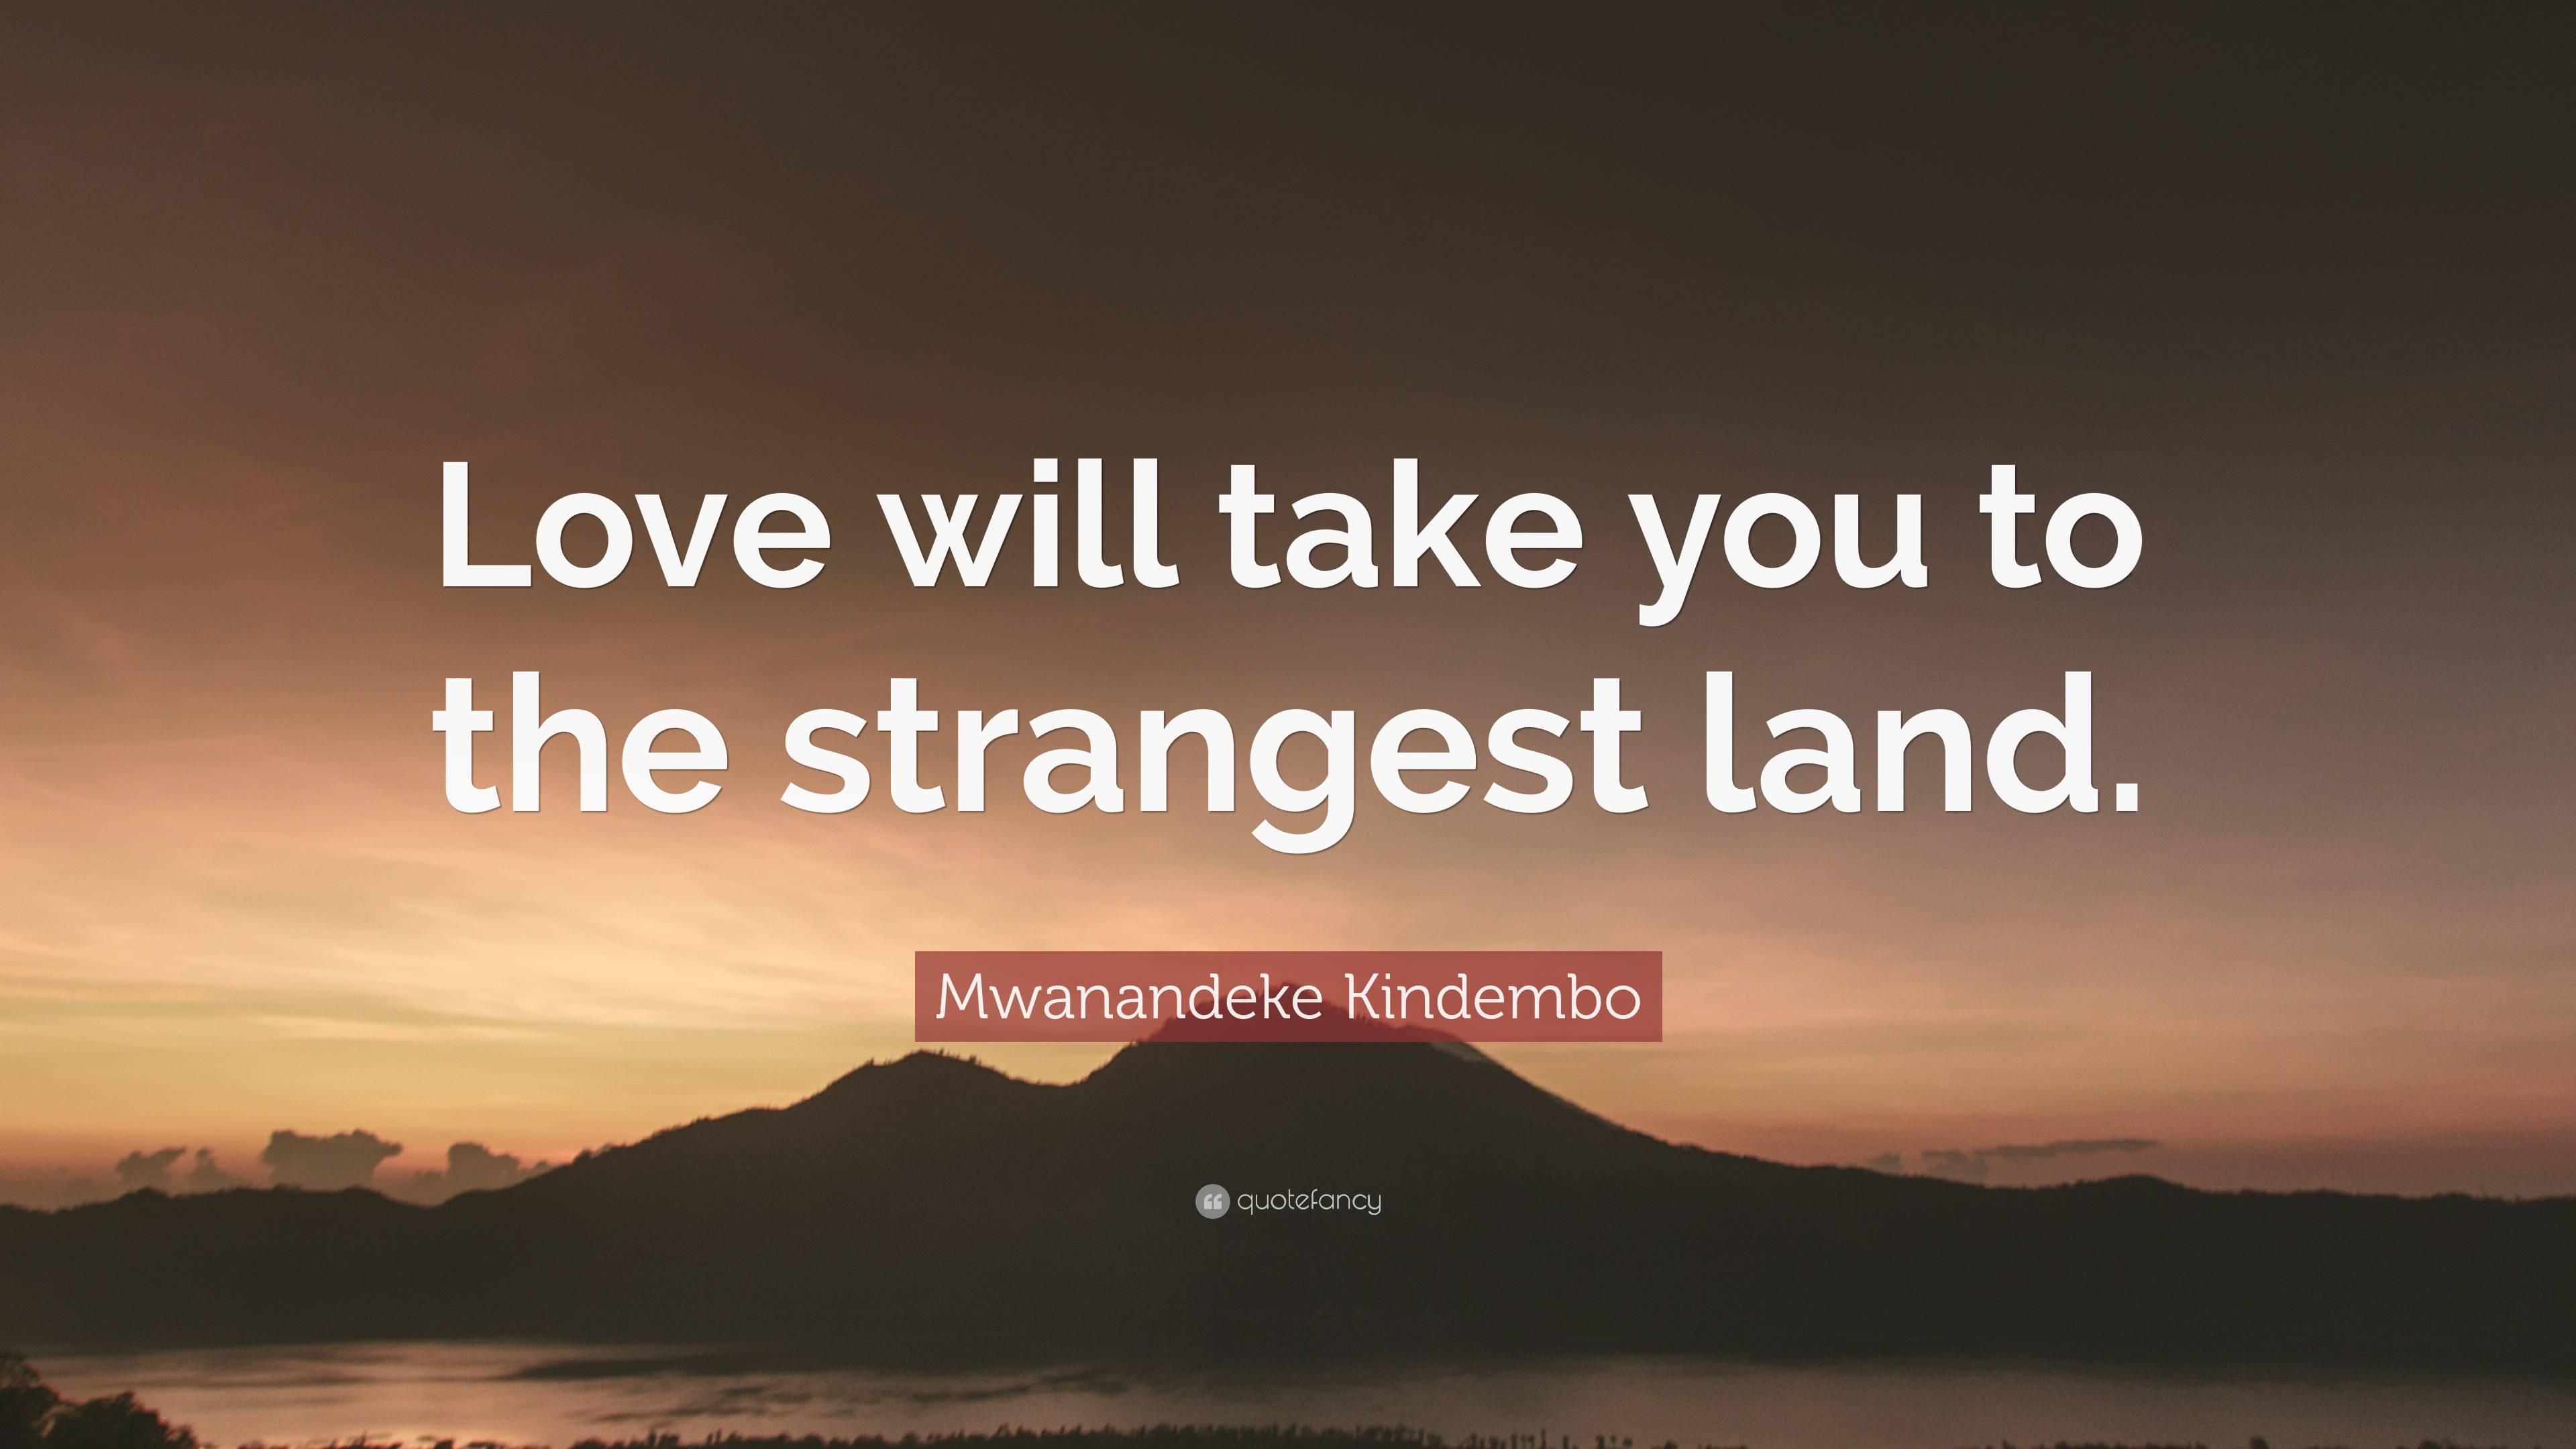 Mwanandeke Kindembo Quote: “Love is full of peace and rage. It's